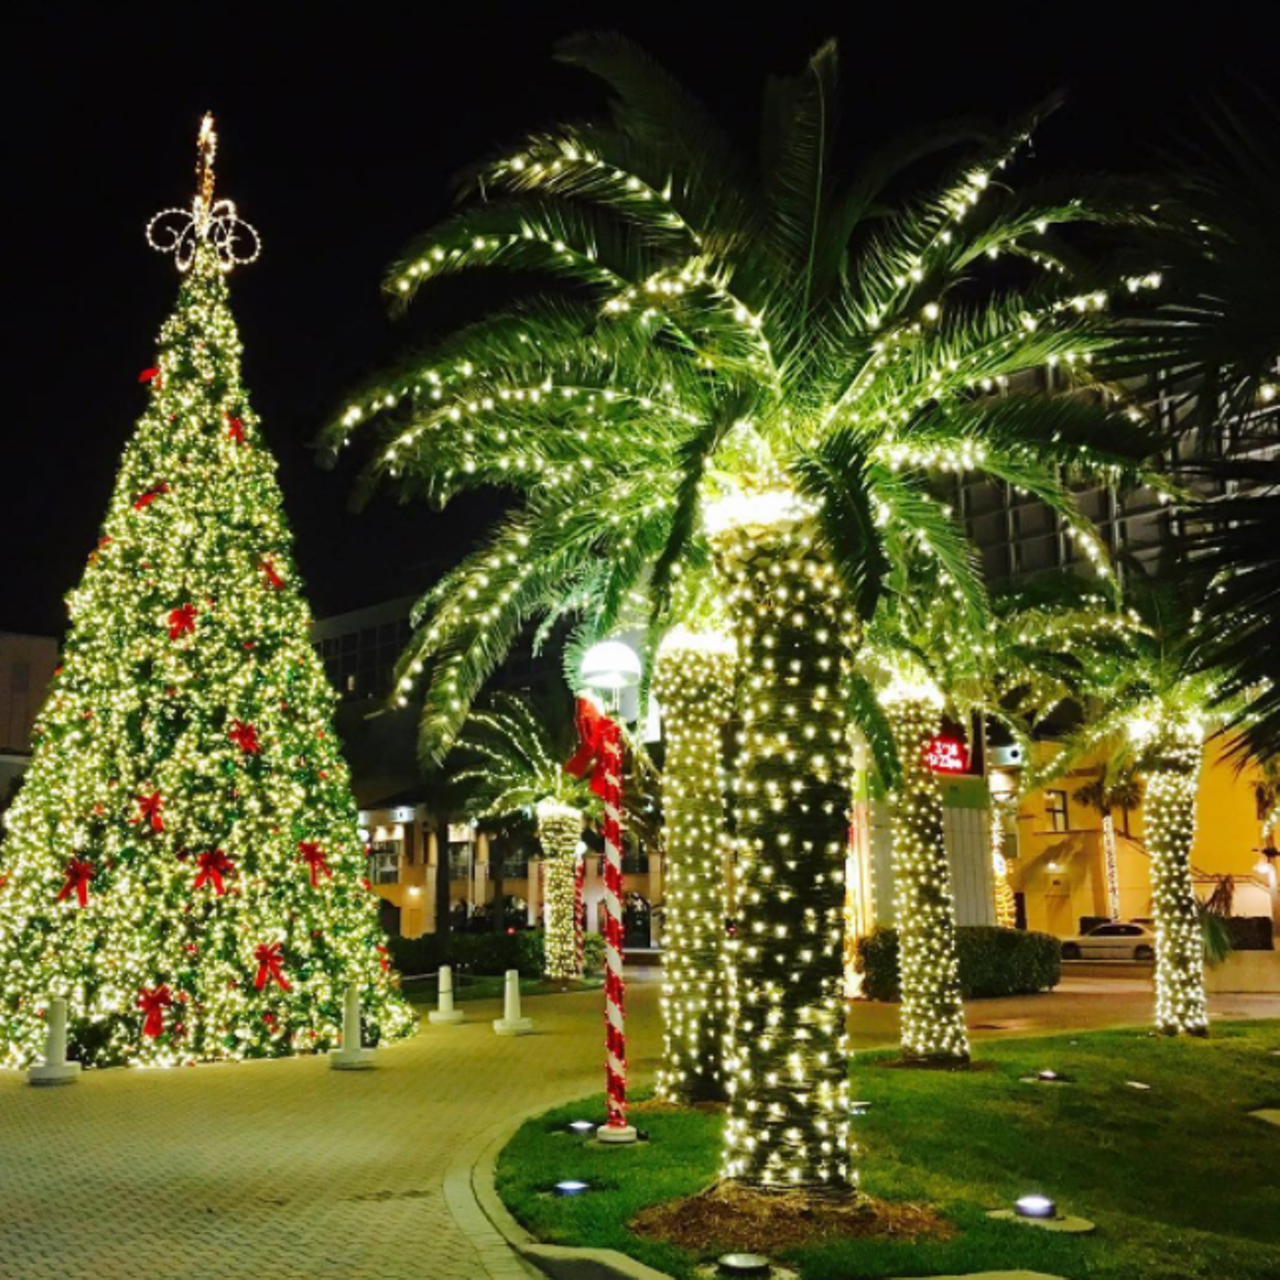 The palm tree becomes the official Florida Christmas tree 
Photo via mamaearth/Instagram